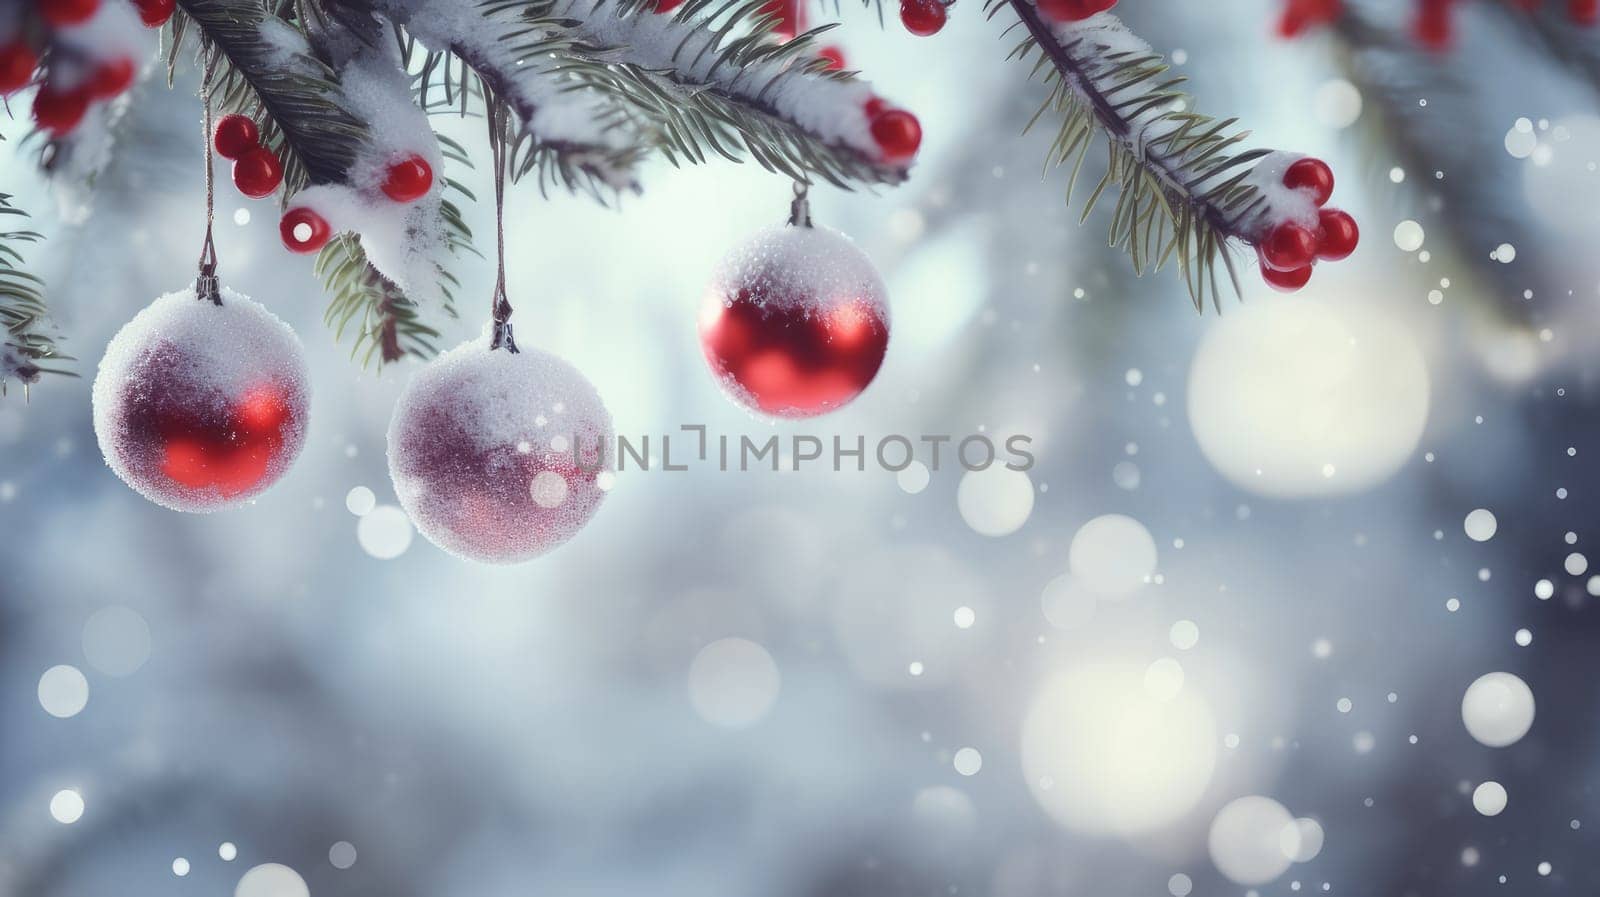 Red balls on fir branches, winter snowy background. festive winter season background, copy space by Alla_Yurtayeva